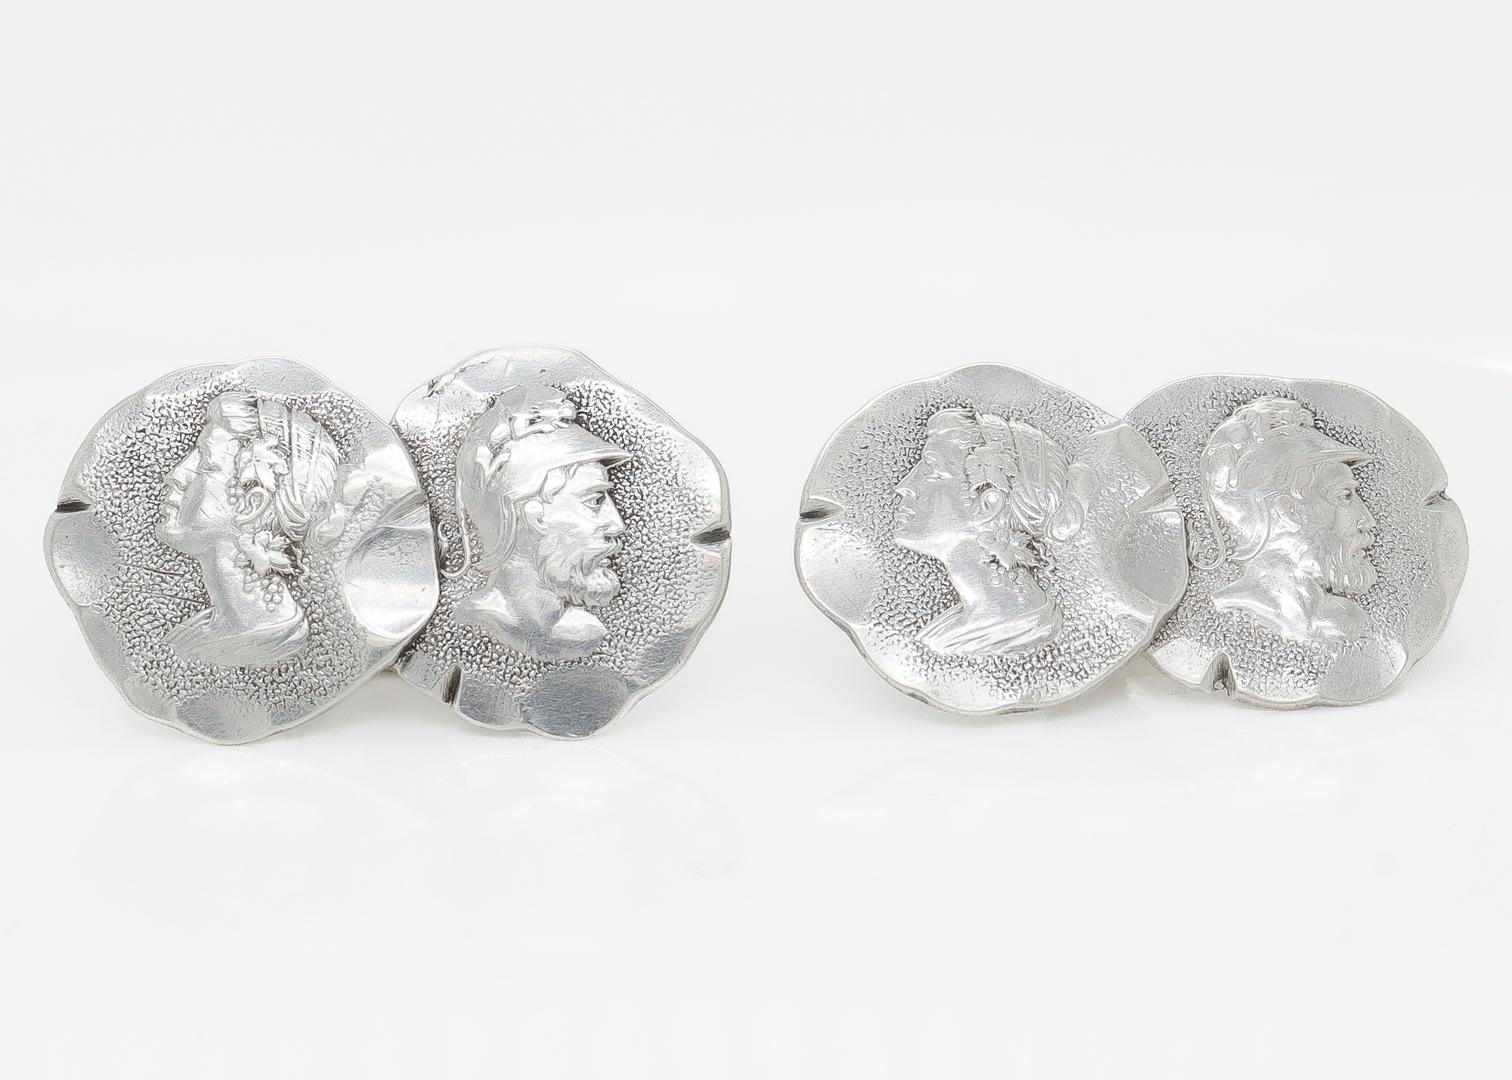 A fine pair of antique Etruscan silver cufflinks.

By the Acme Silver Co.

In the style of Shiebler & Co.

Each cufflink consisting of two identical Etruscan cameo medallions - a woman on the left and a helmeted man on the right.

Marked to the